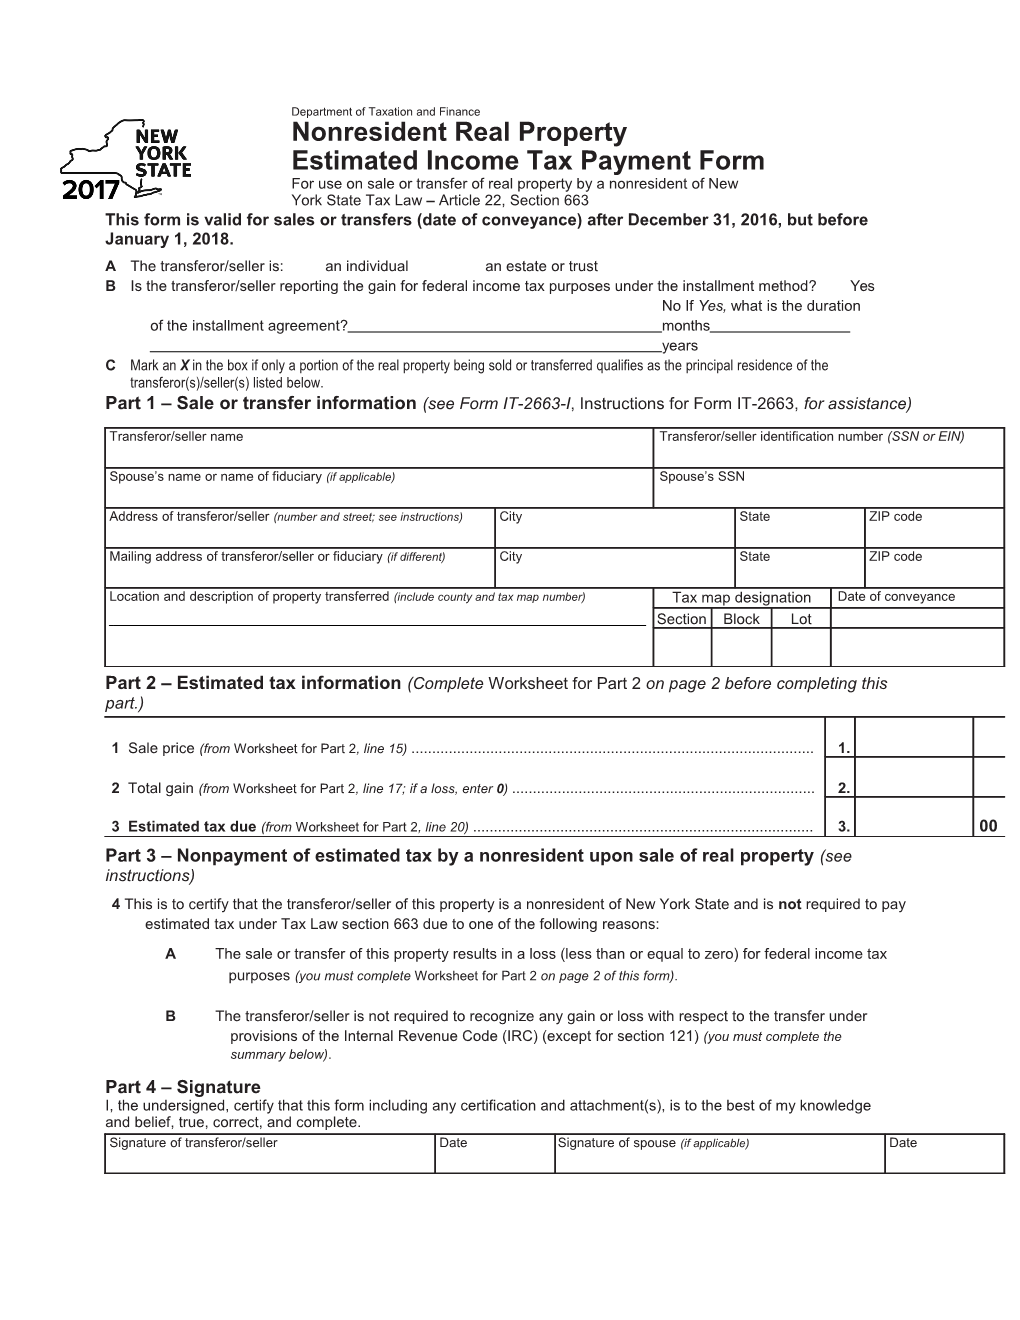 Form IT-2663:2017:Nonresident Real Property Estimated Income Tax Payment Form:IT2663